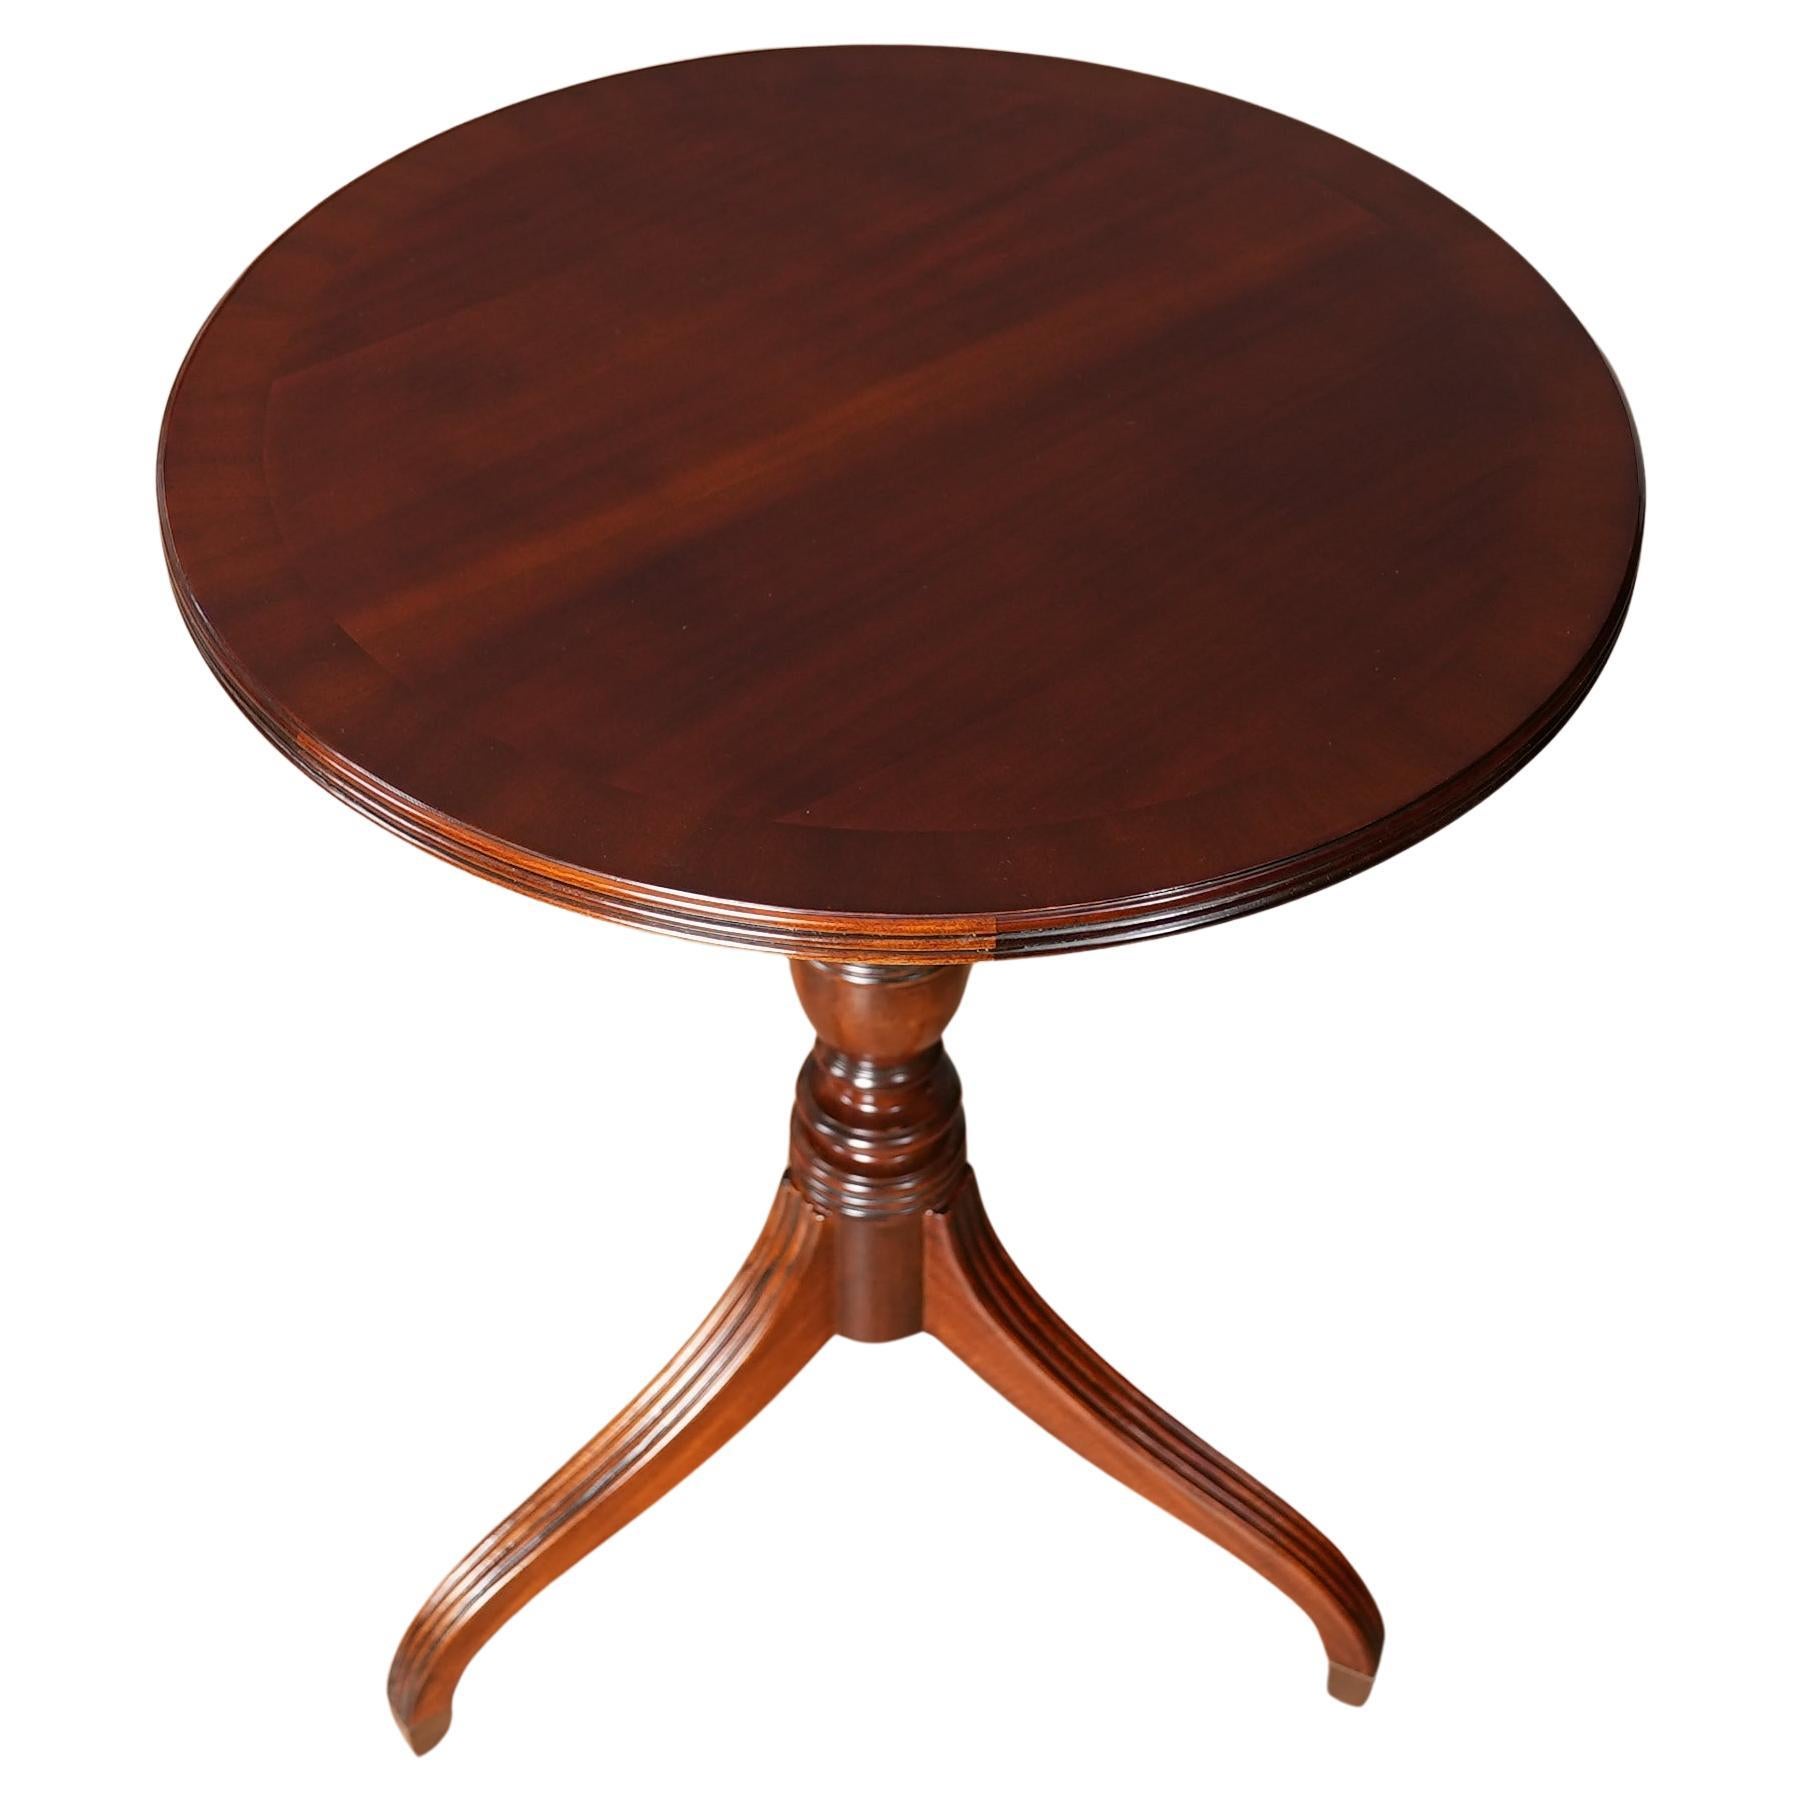 Round Mahogany Table with Reeded Edge